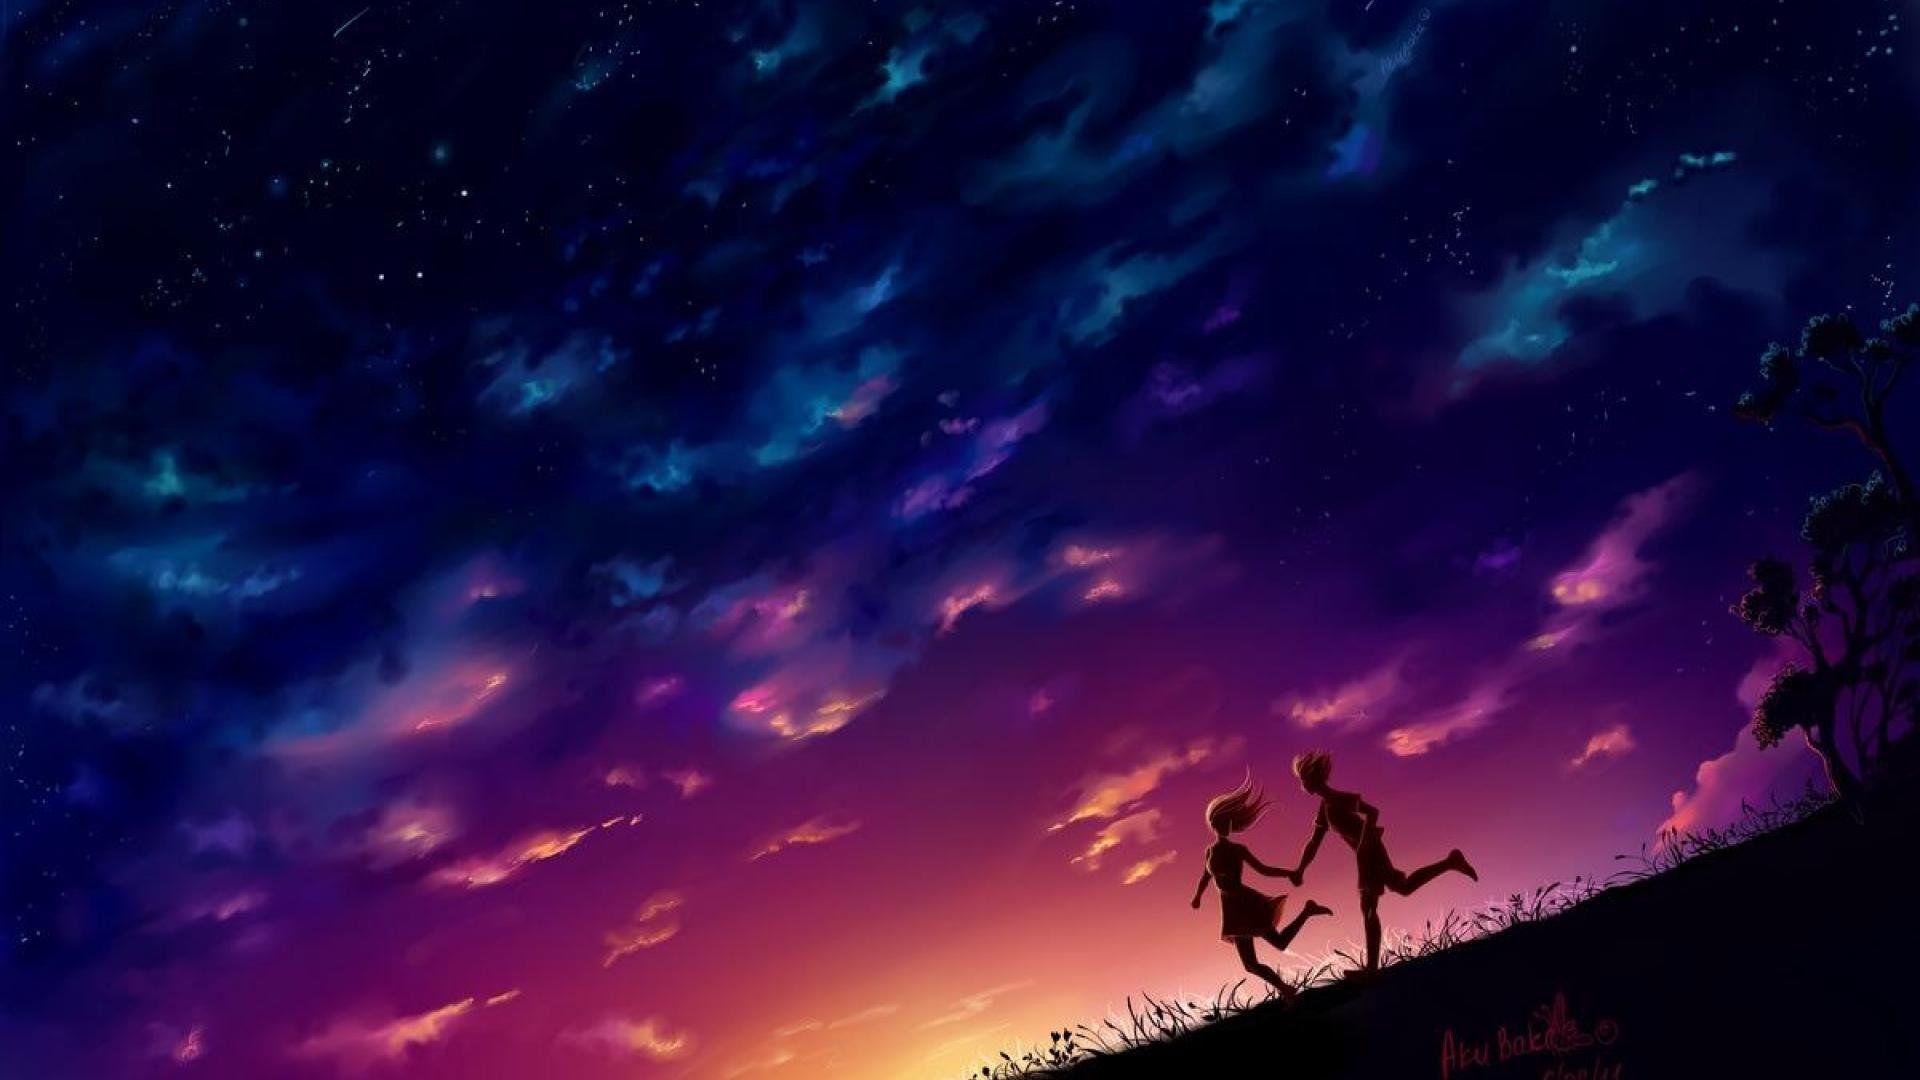 Romantic Anime Wallpapers - Top Free Romantic Anime Backgrounds